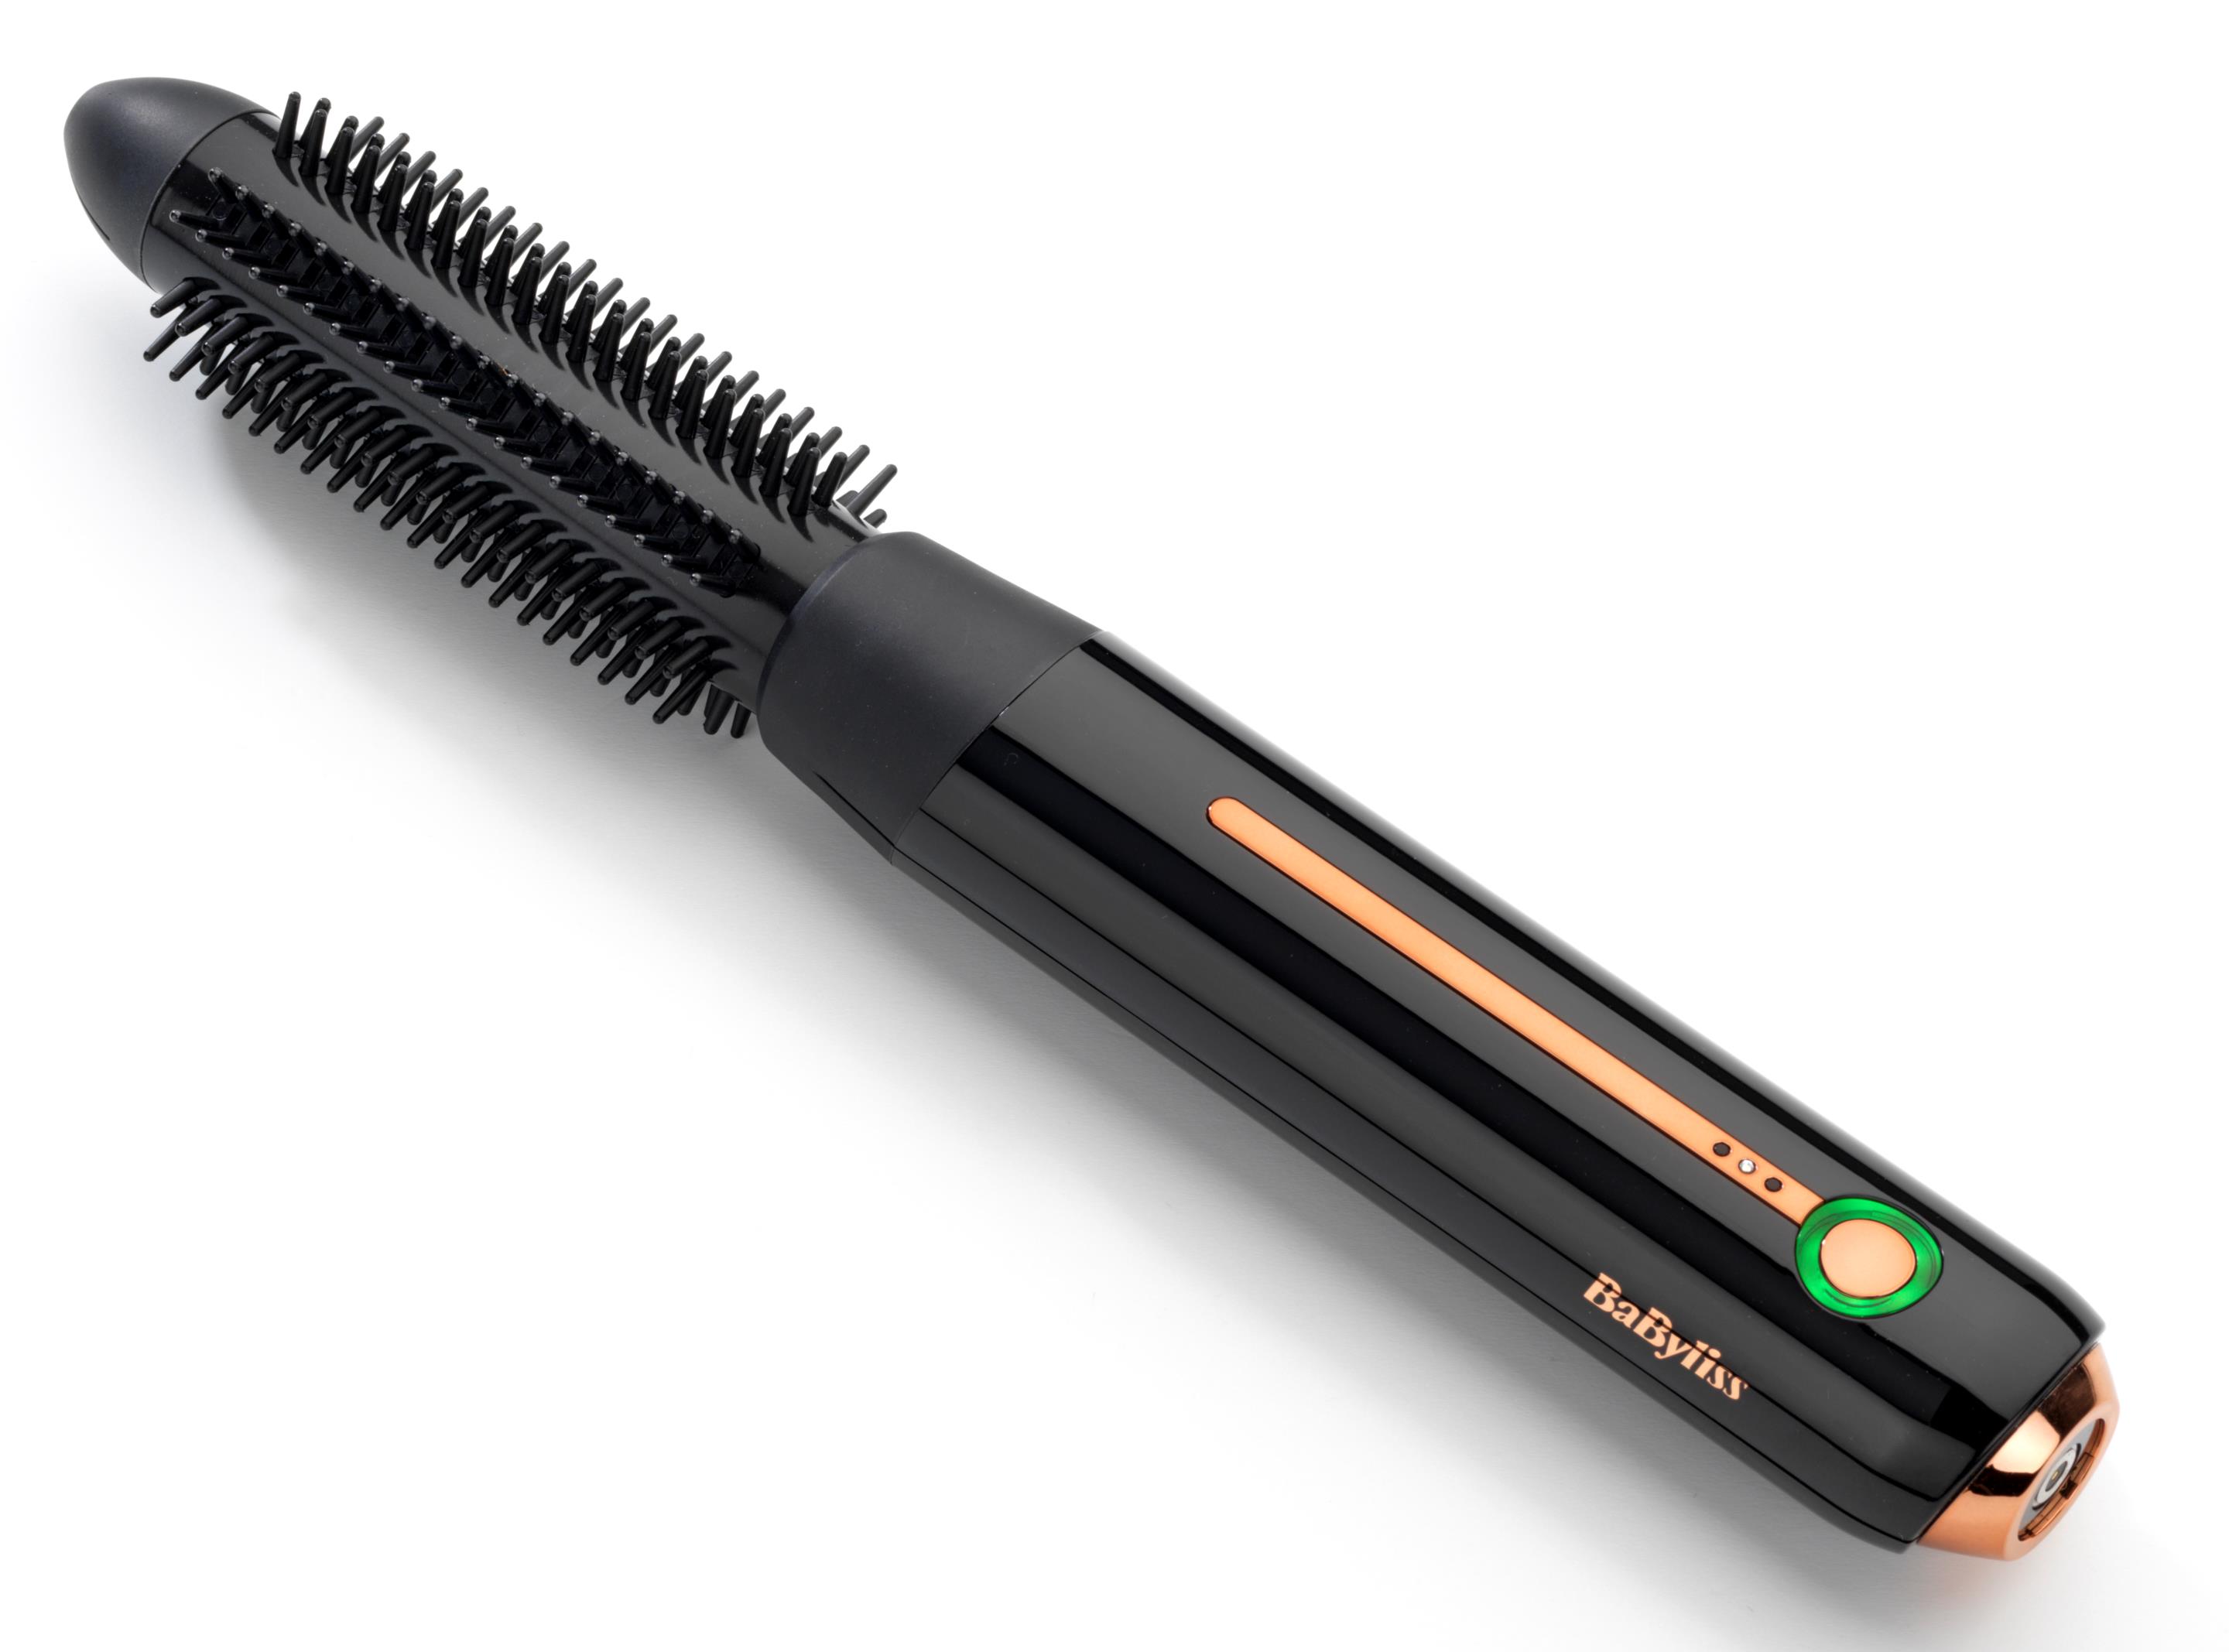 9000 cordless hot brush from Babyliss